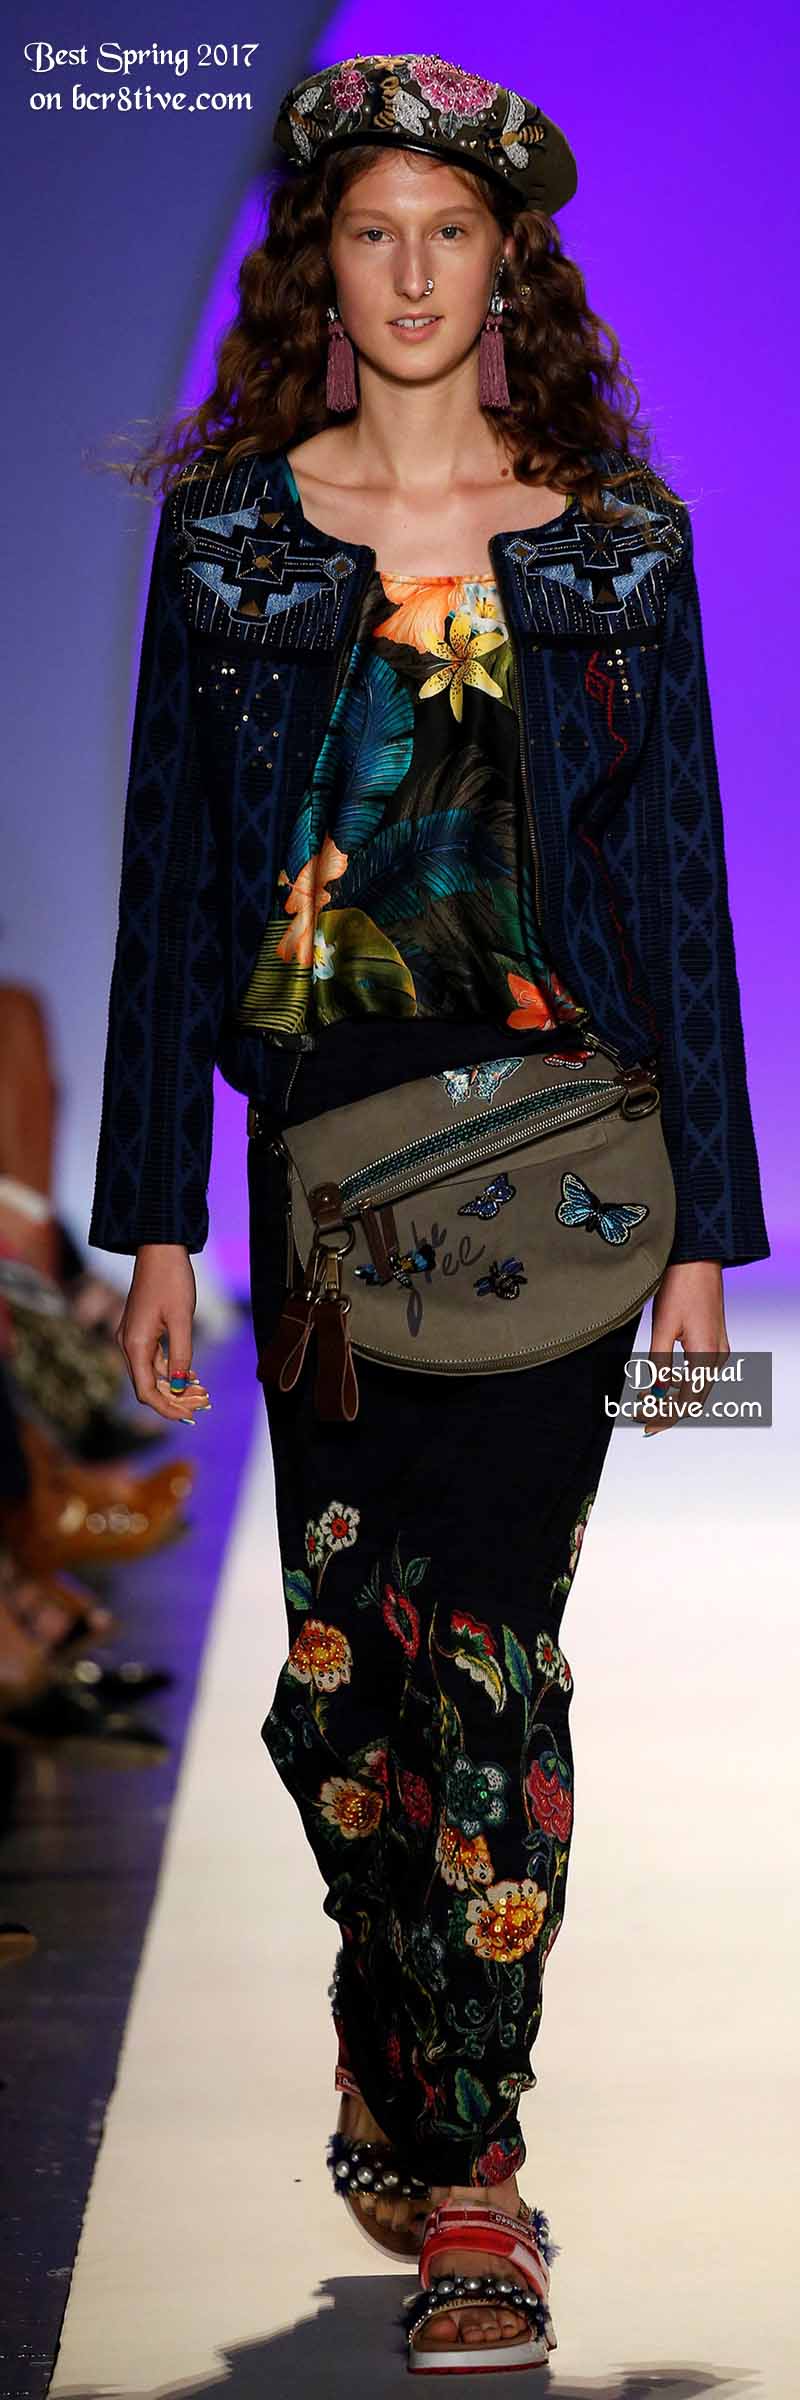 Desigual - The Best Looks from New York Fashion Week Spring 2017